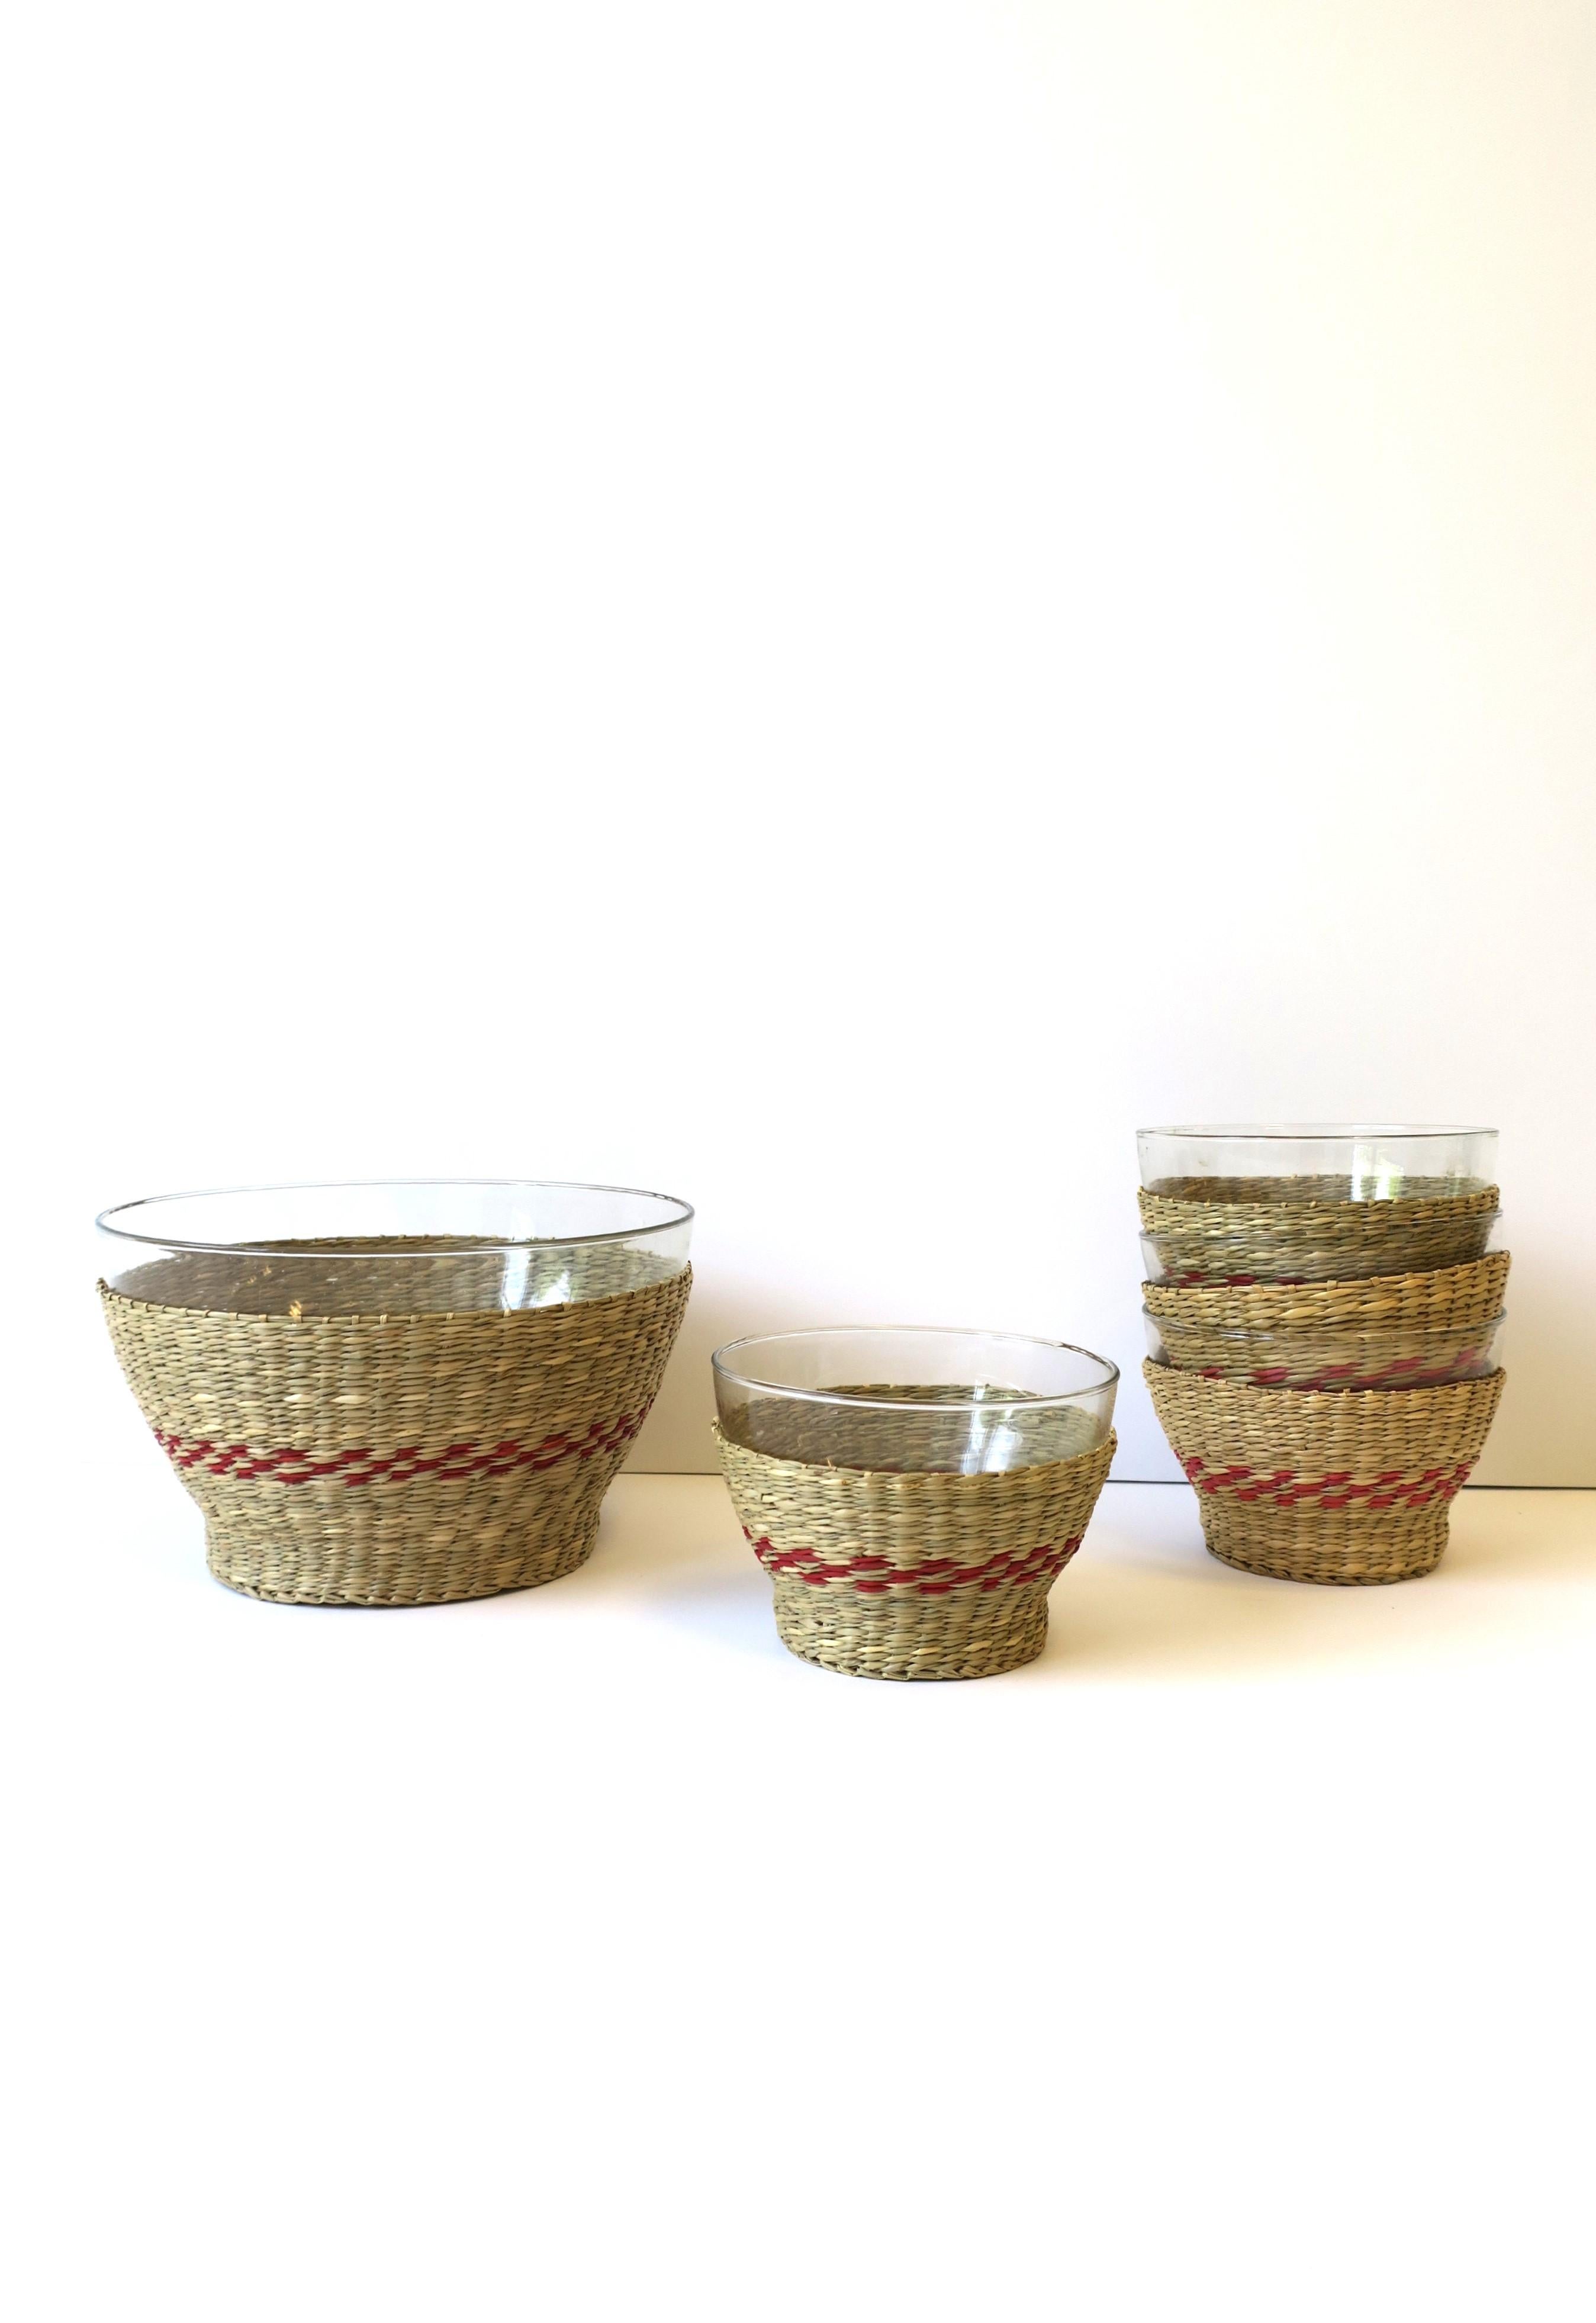 Contemporary Wicker and Glass Bowls, Set of 5